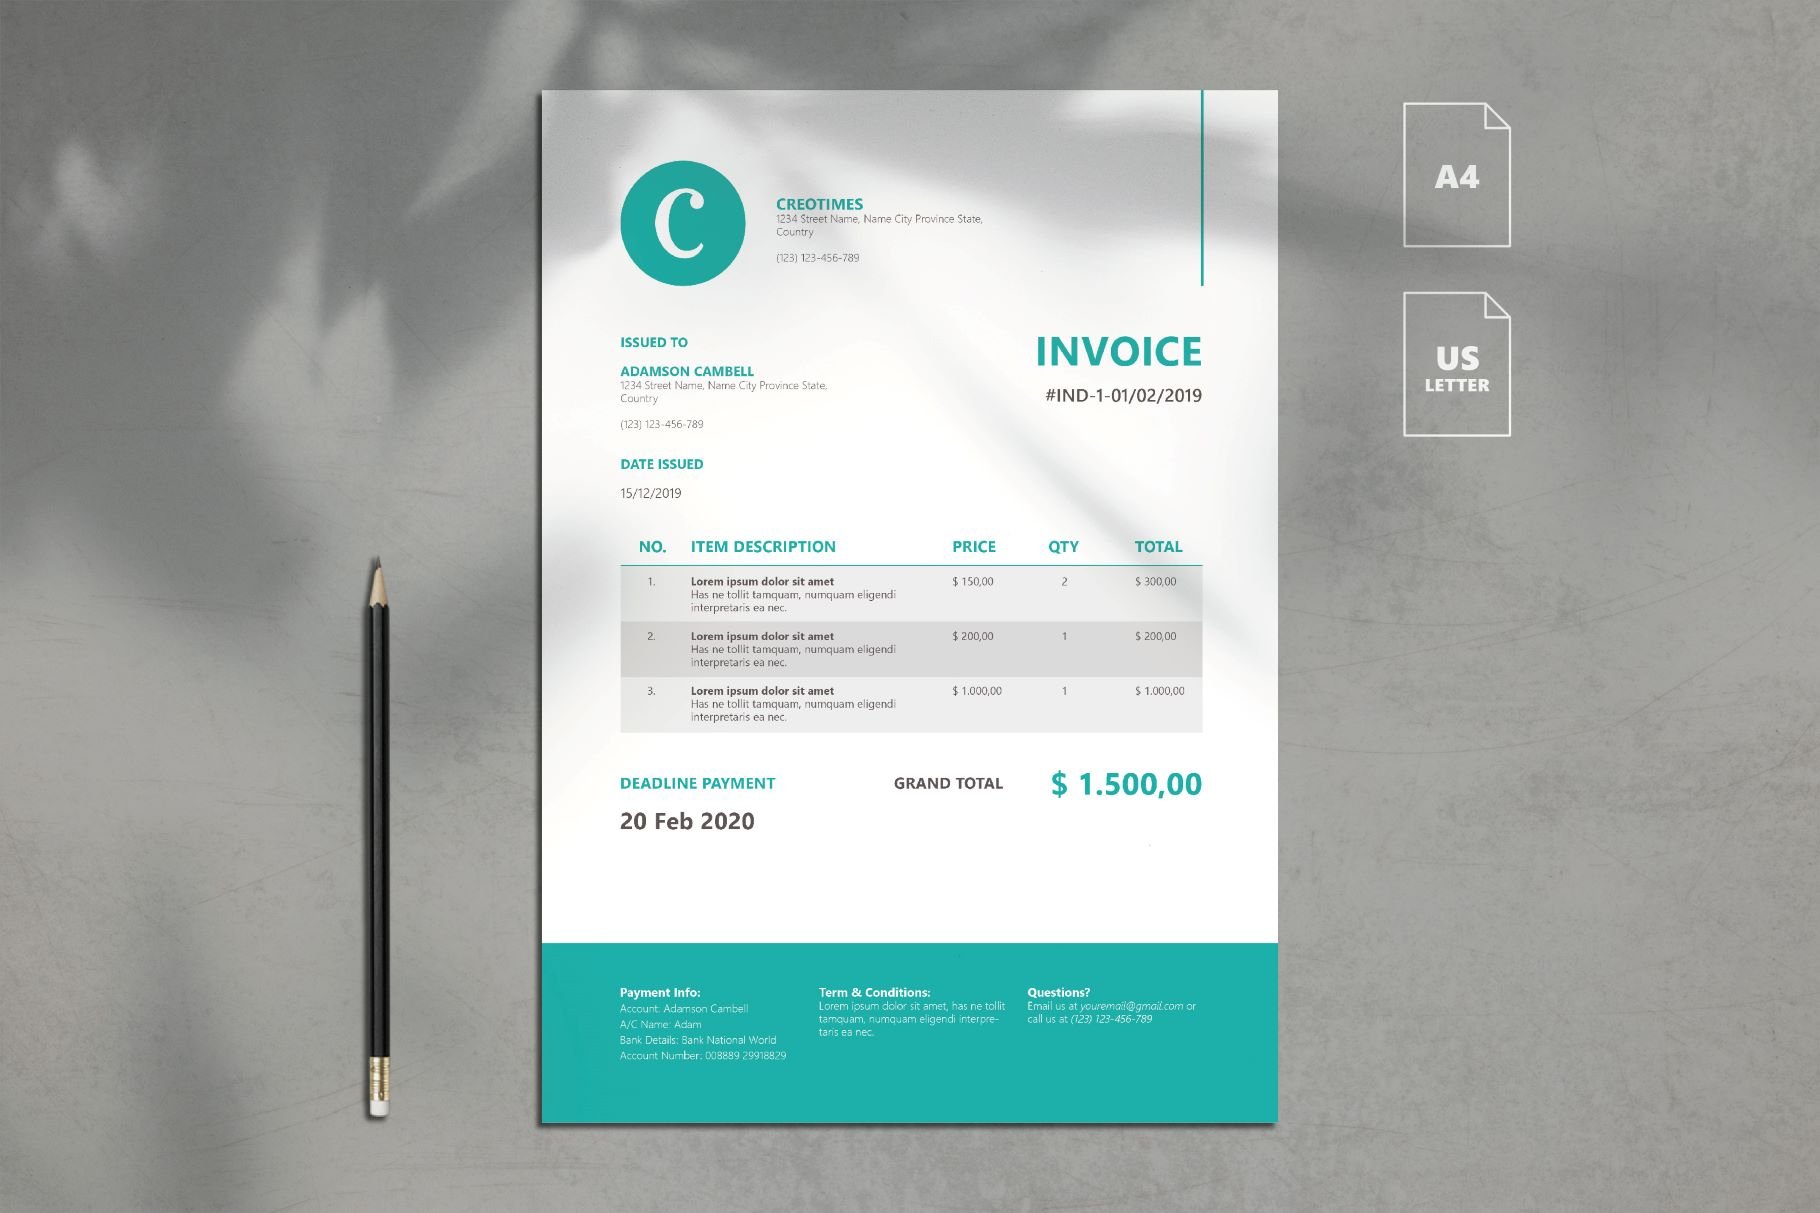 Business Invoice Template Vol. 5 cover image.